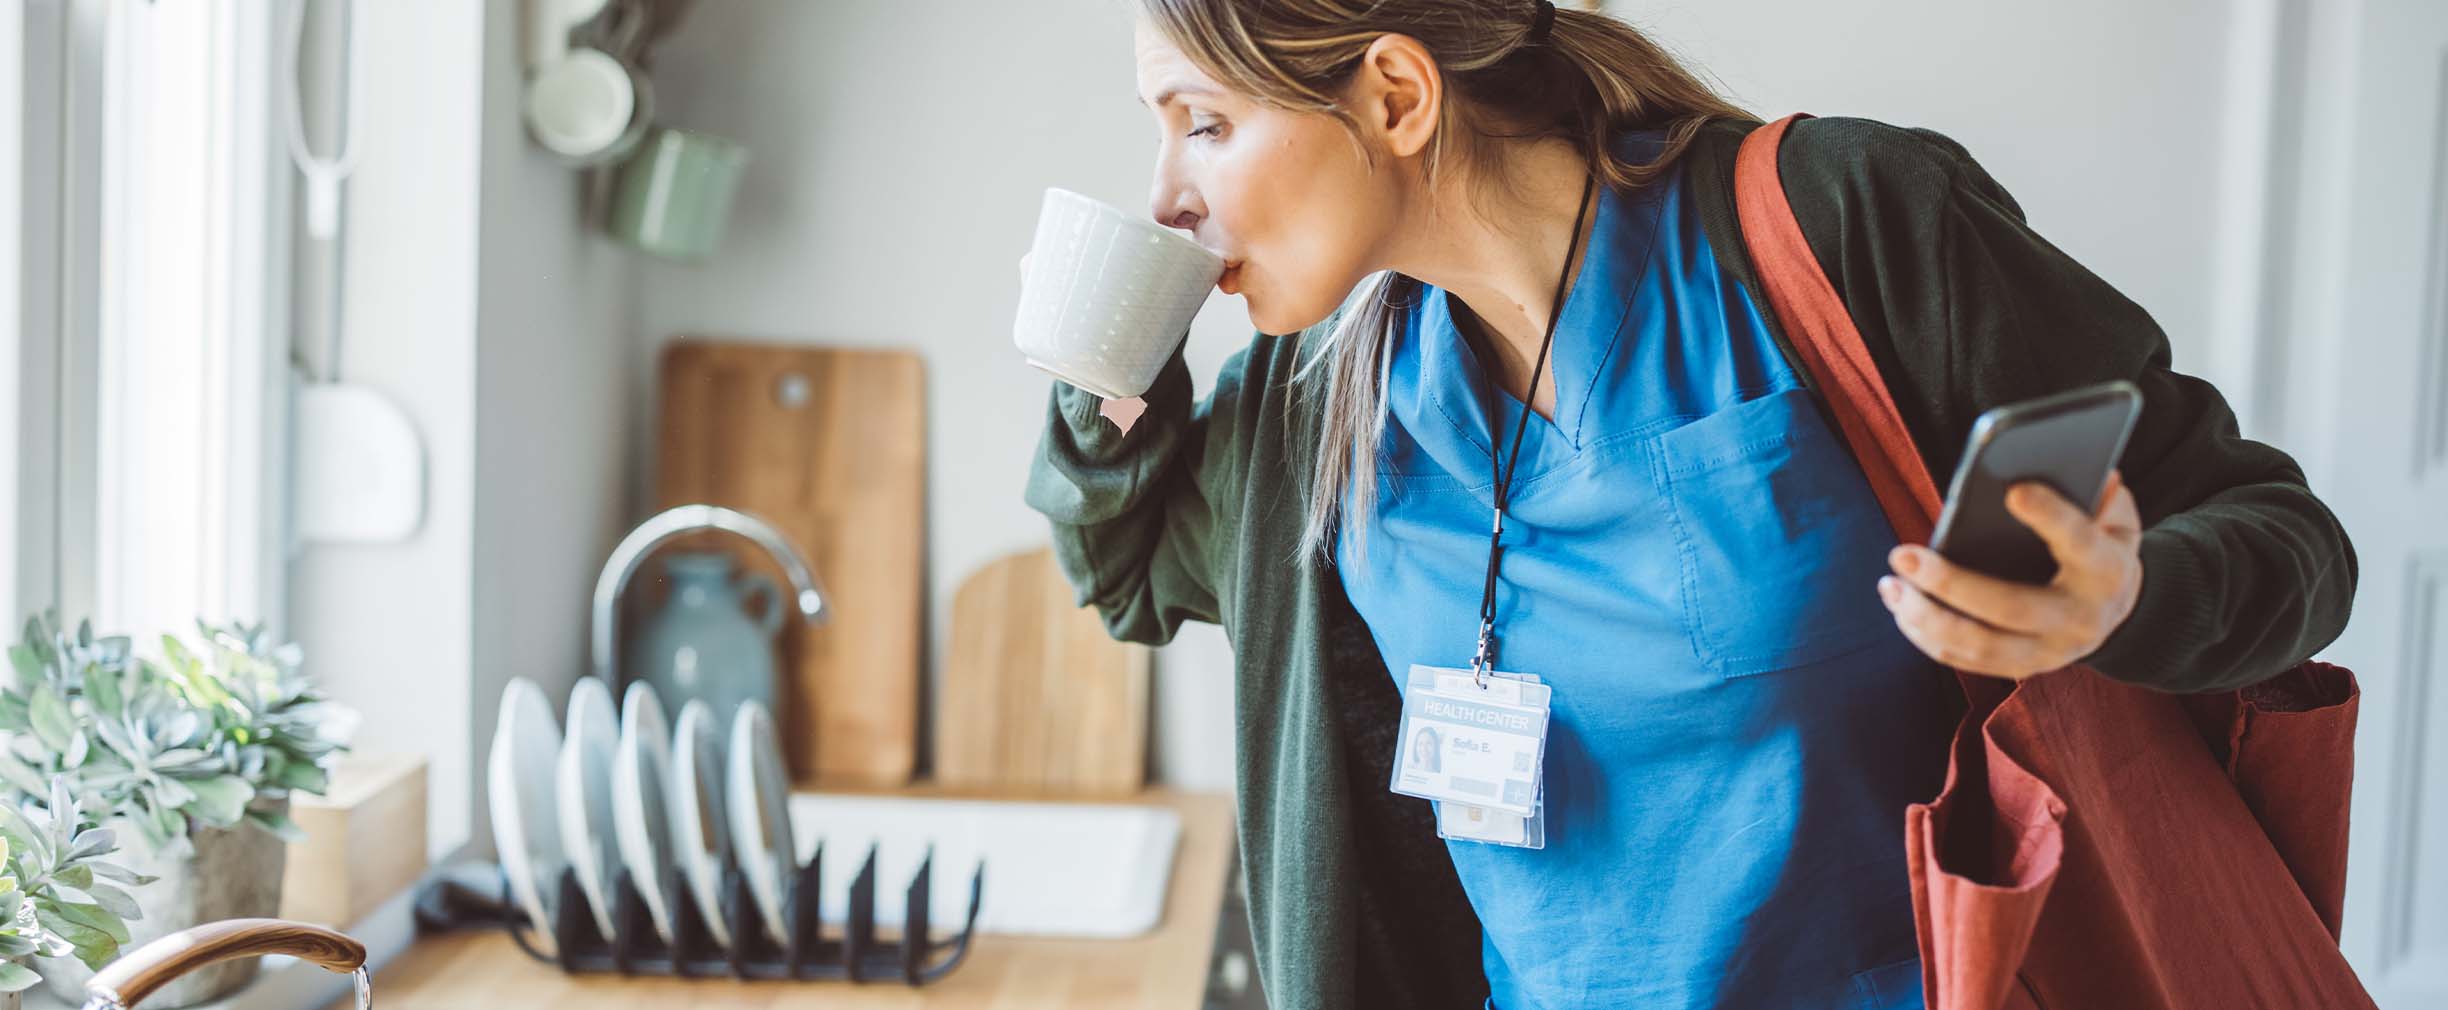 A medical professional wearing scrubs and a jacket having one last sip of coffee before leaving home